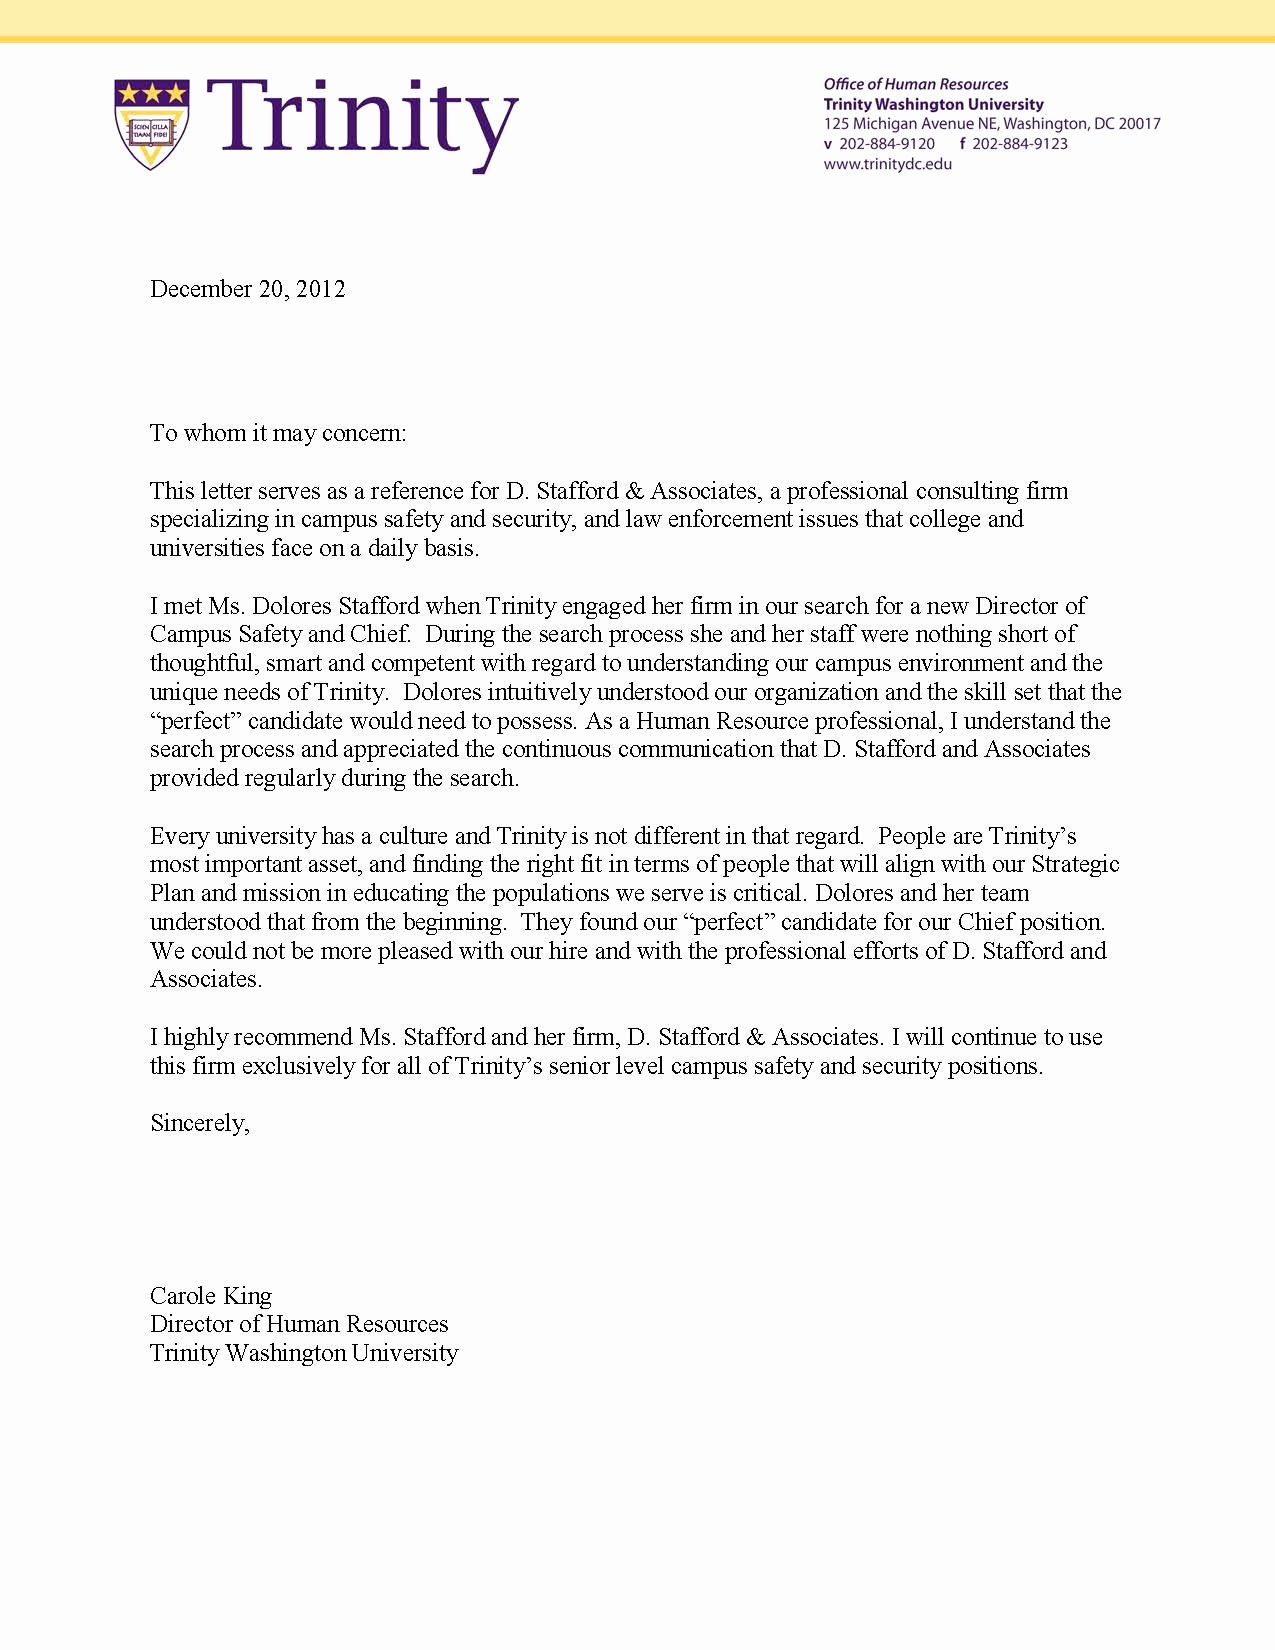 Law Enforcement Letter Of Recommendation Unique About Clery Act Training &amp; Campus Safety D Stafford